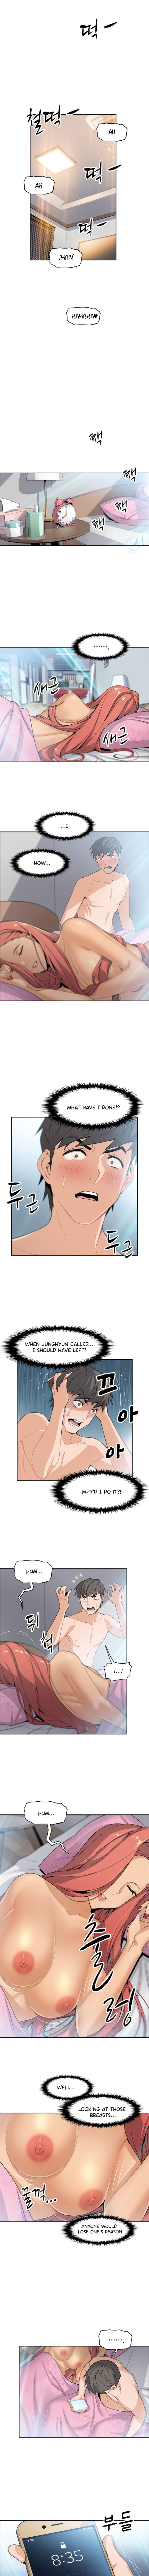 Housekeeper Manhwa - Chapter 2 Page 9